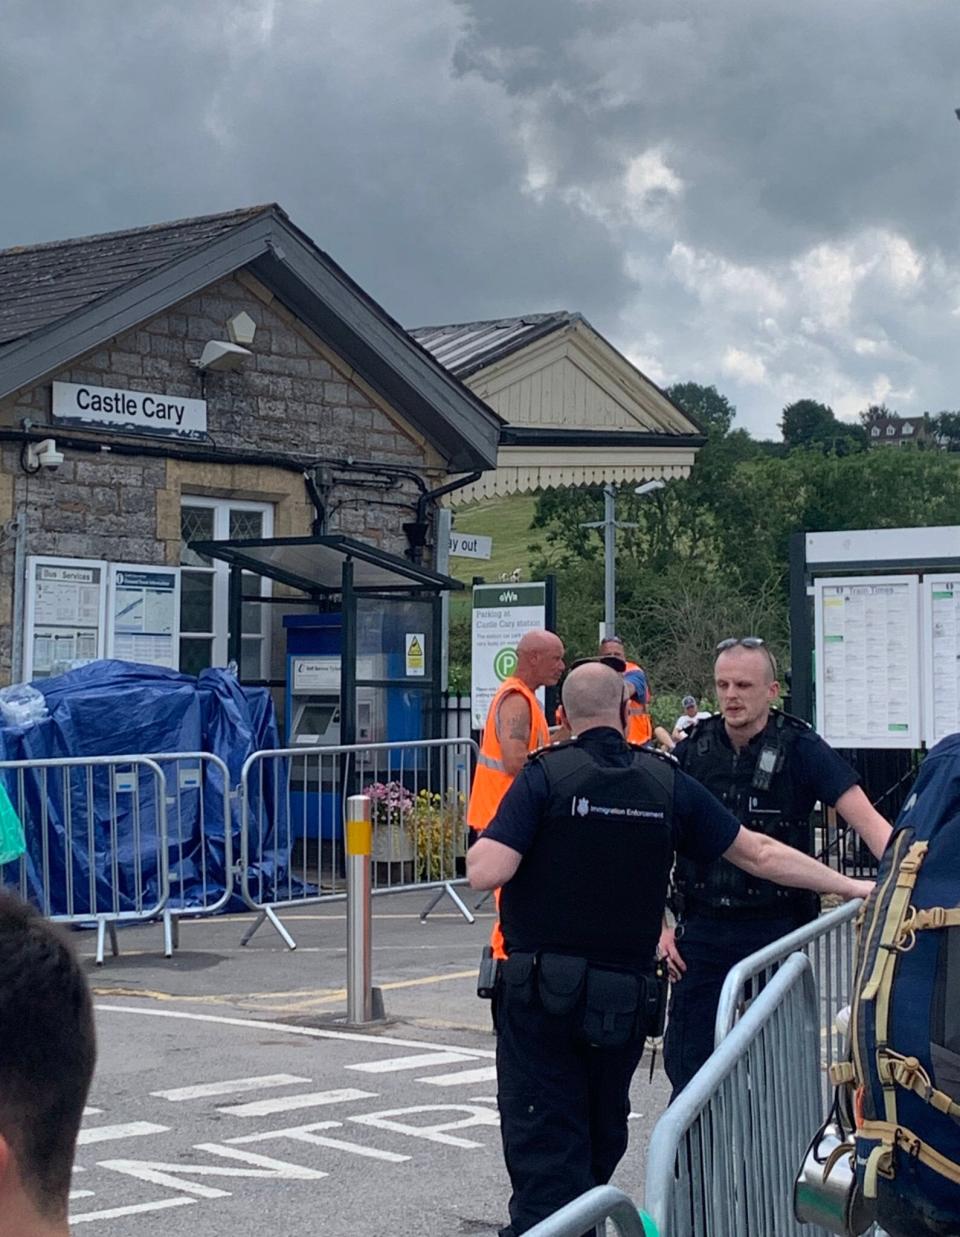 Immigration enforcement officers at Castle Cary station (Griff Ferris/Twitter)